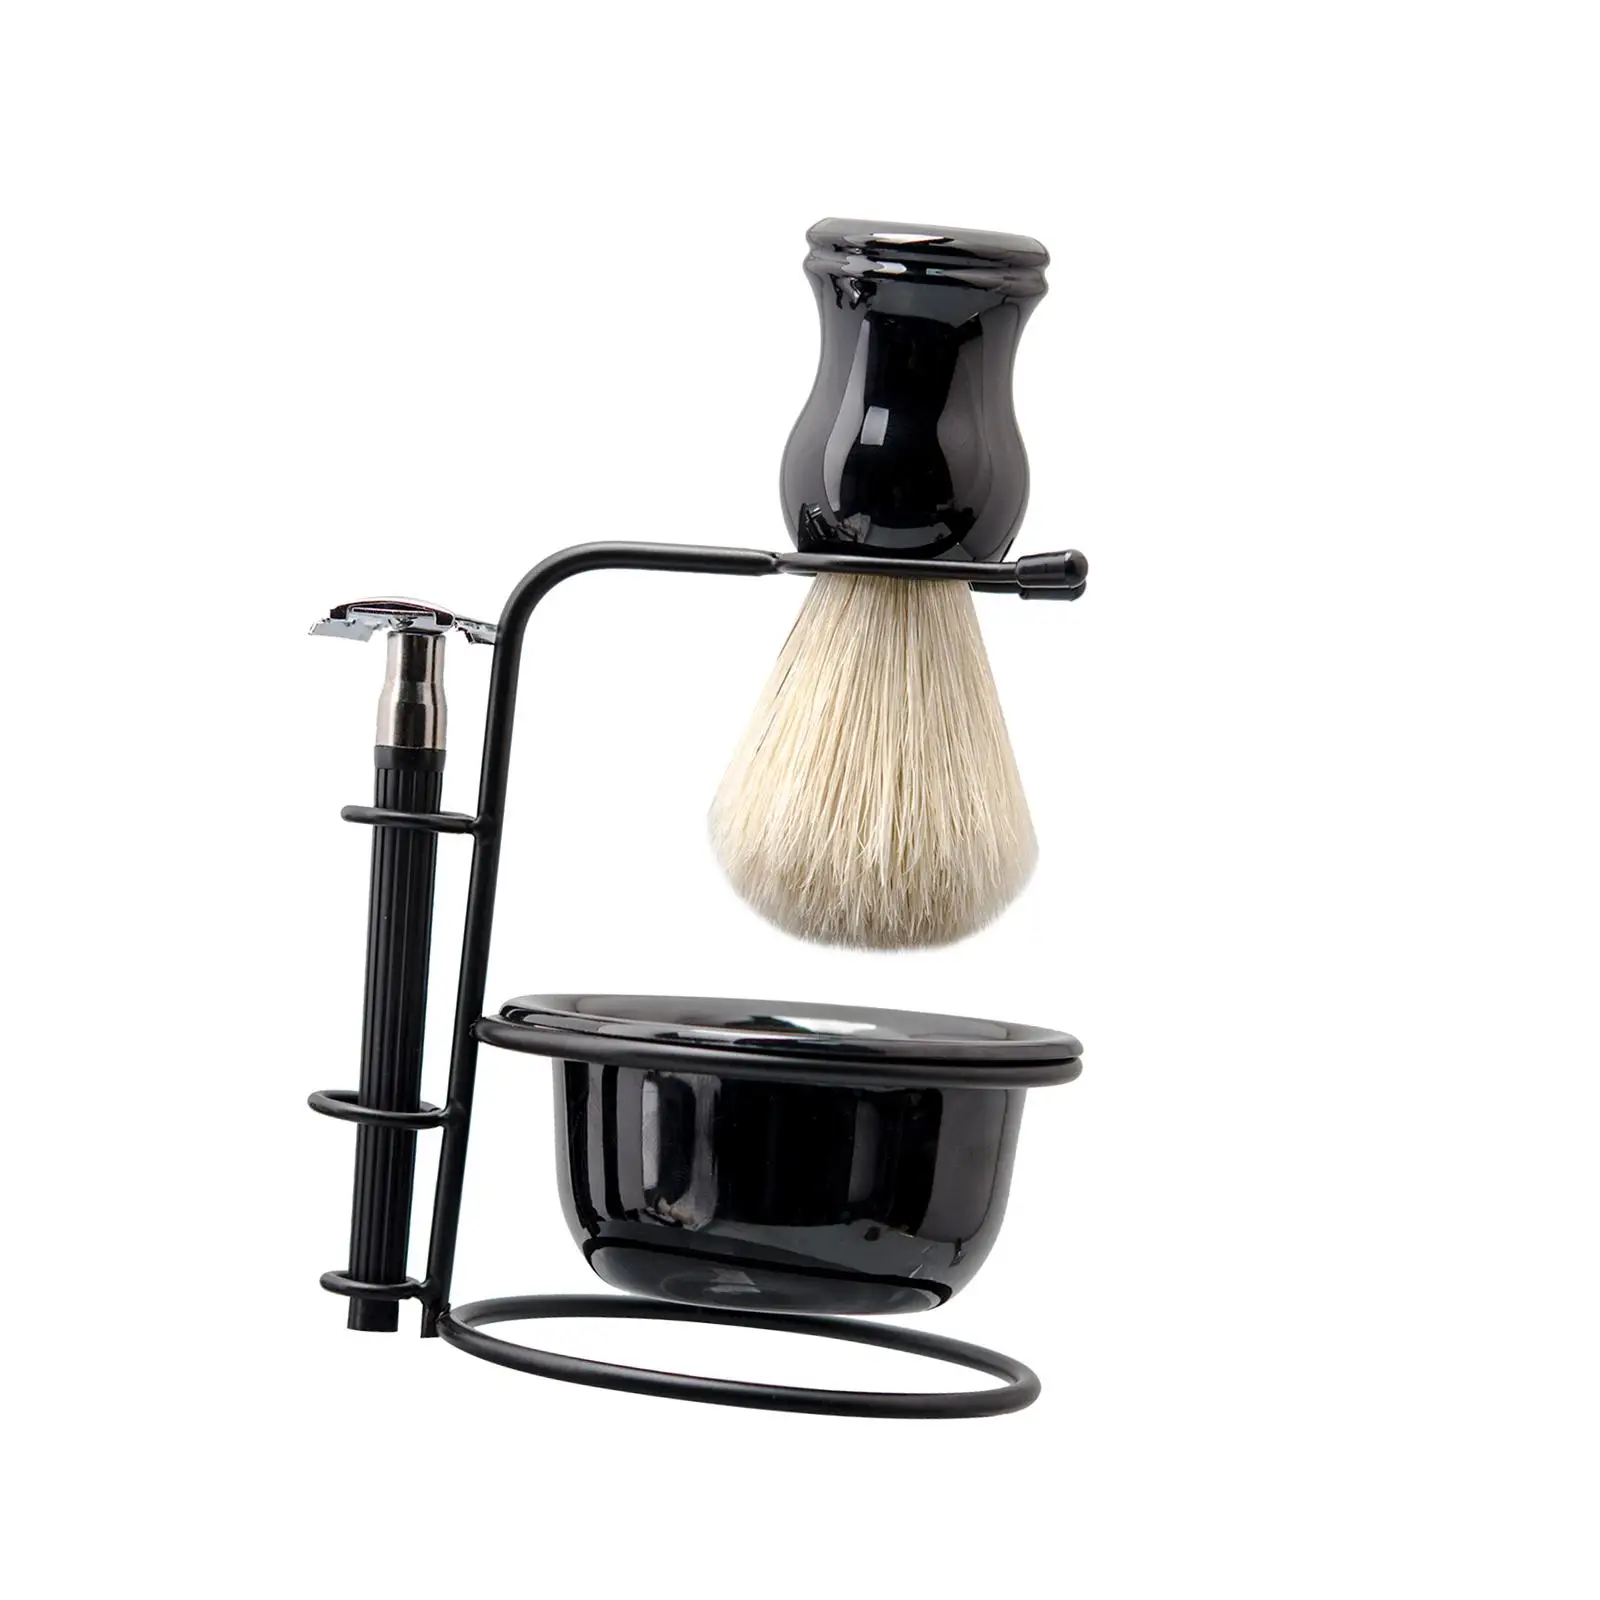 4 in 1 Shaving Set Sturdy Shaving Brush Stand Kit Perfect for Every Day Use